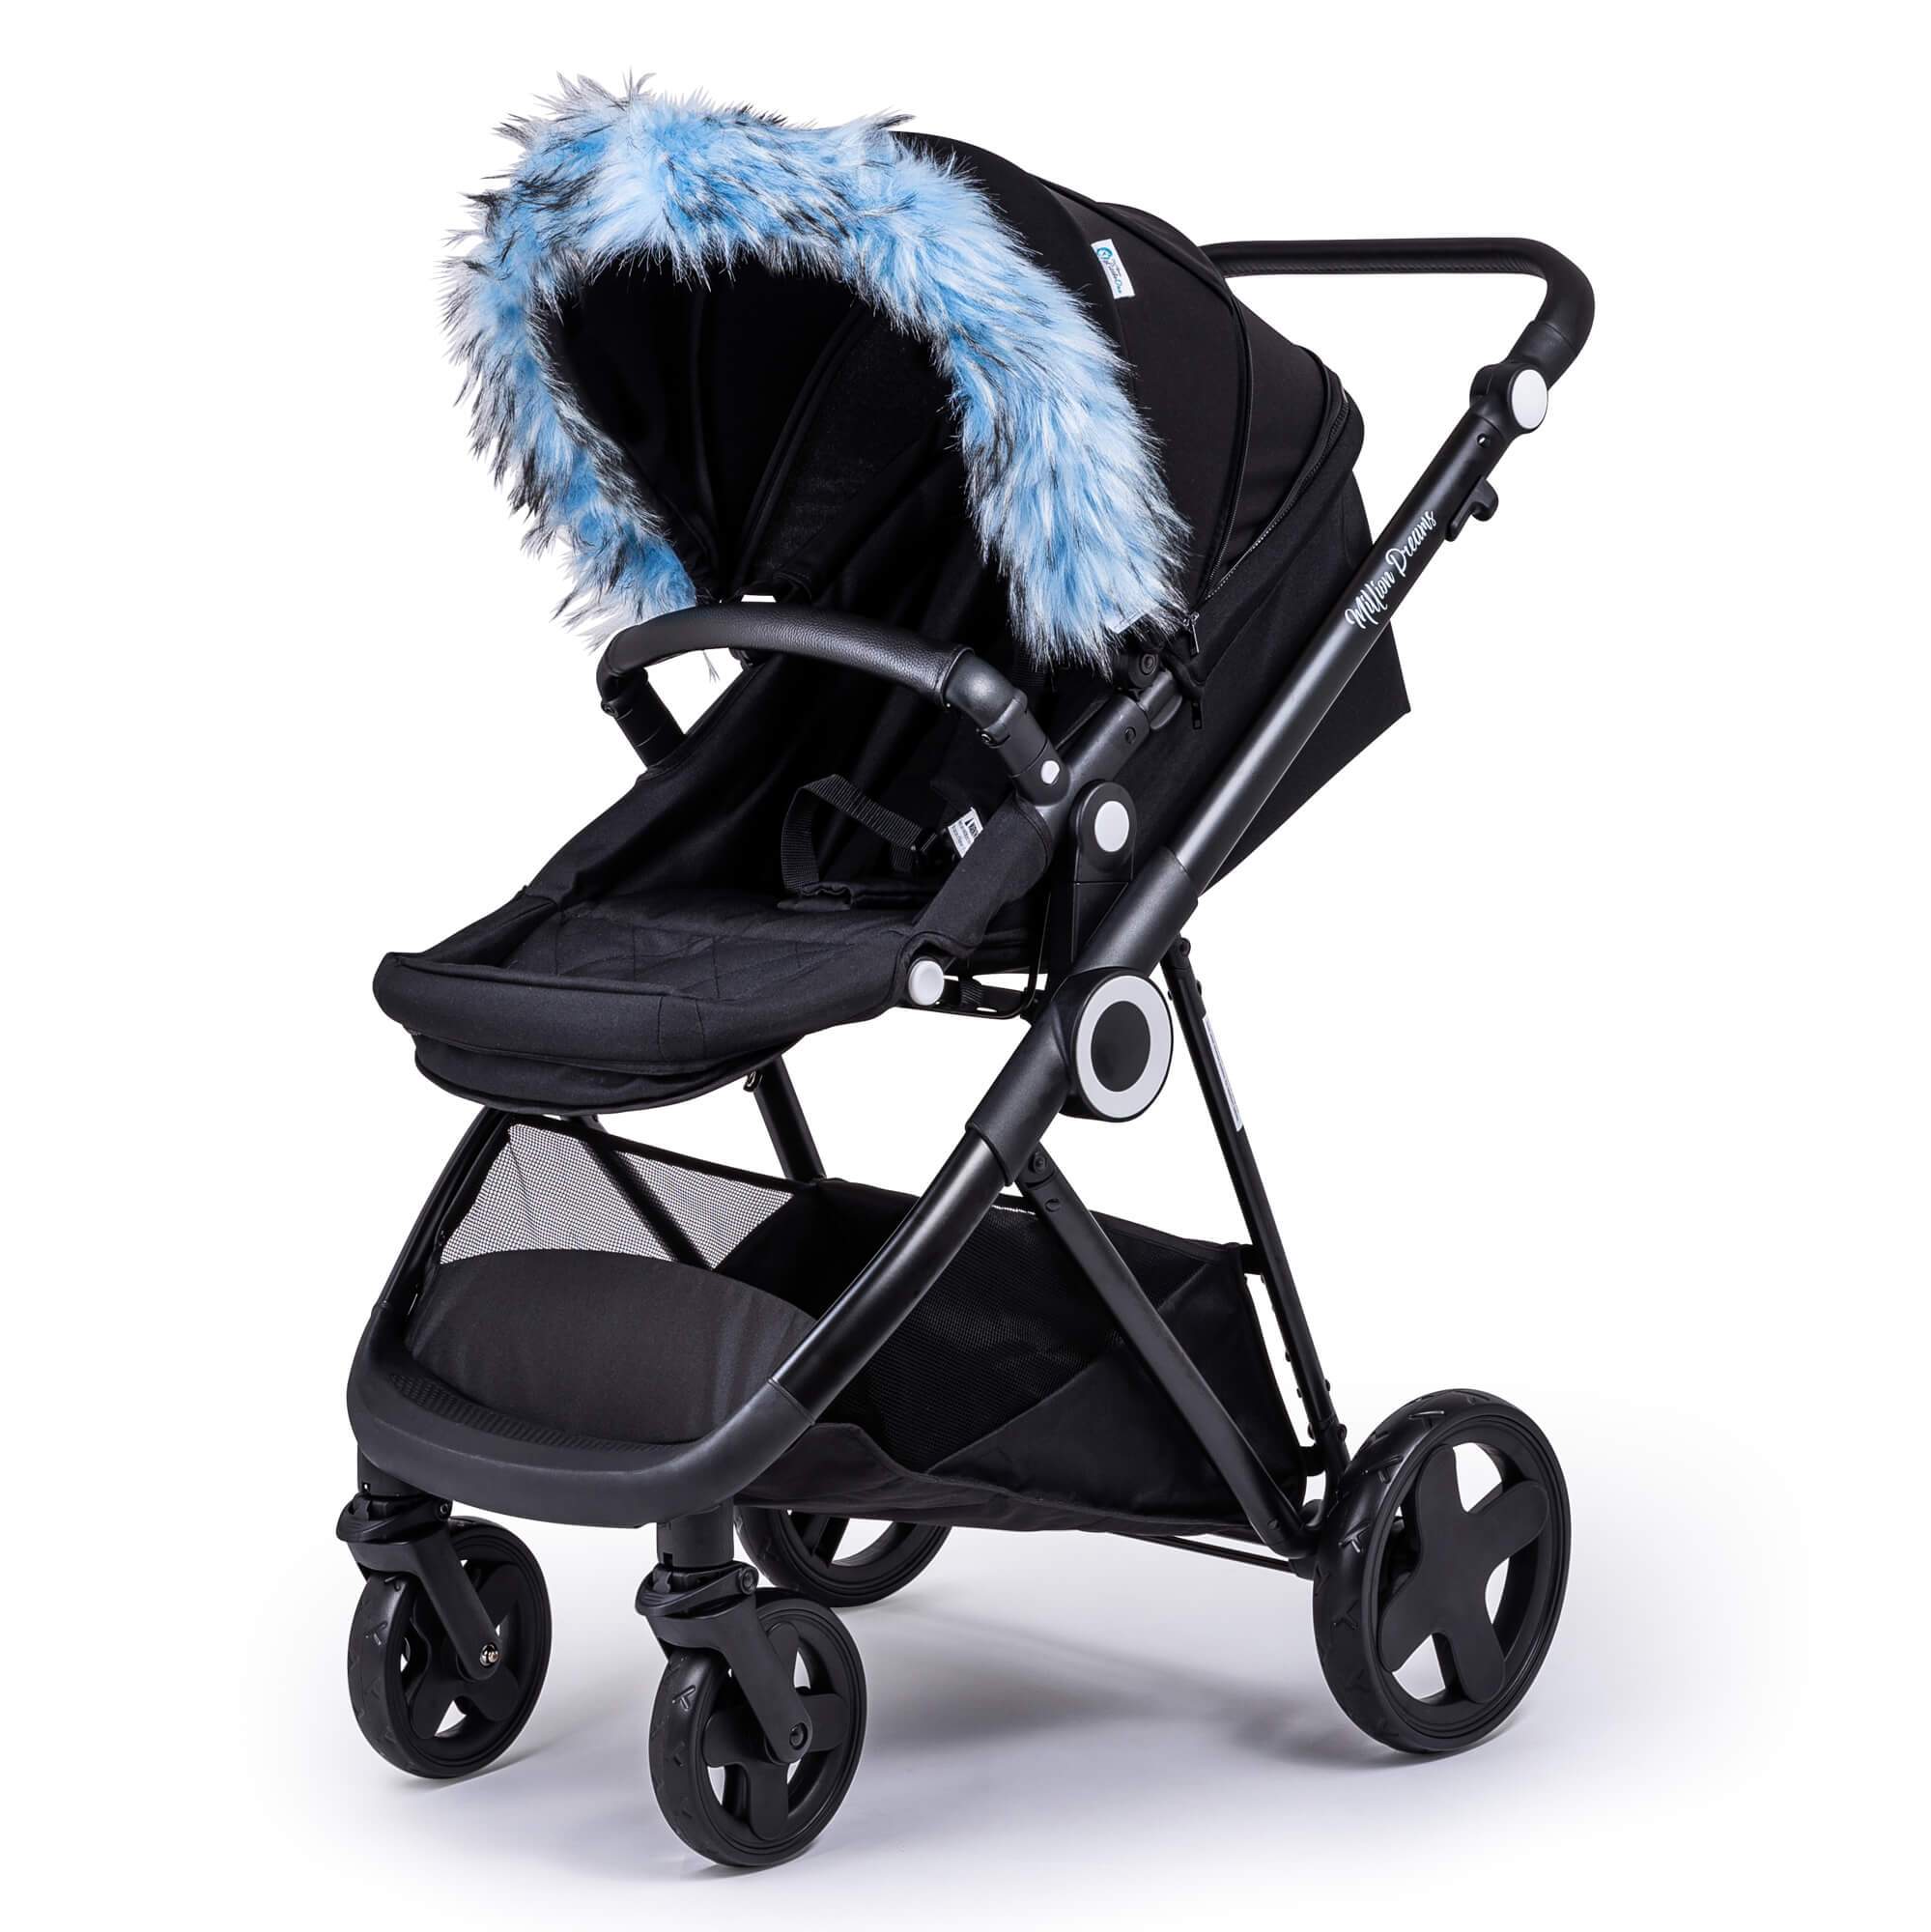 Pram Fur Hood Trim Attachment for Pushchair Compatible with Joie - For Your Little One